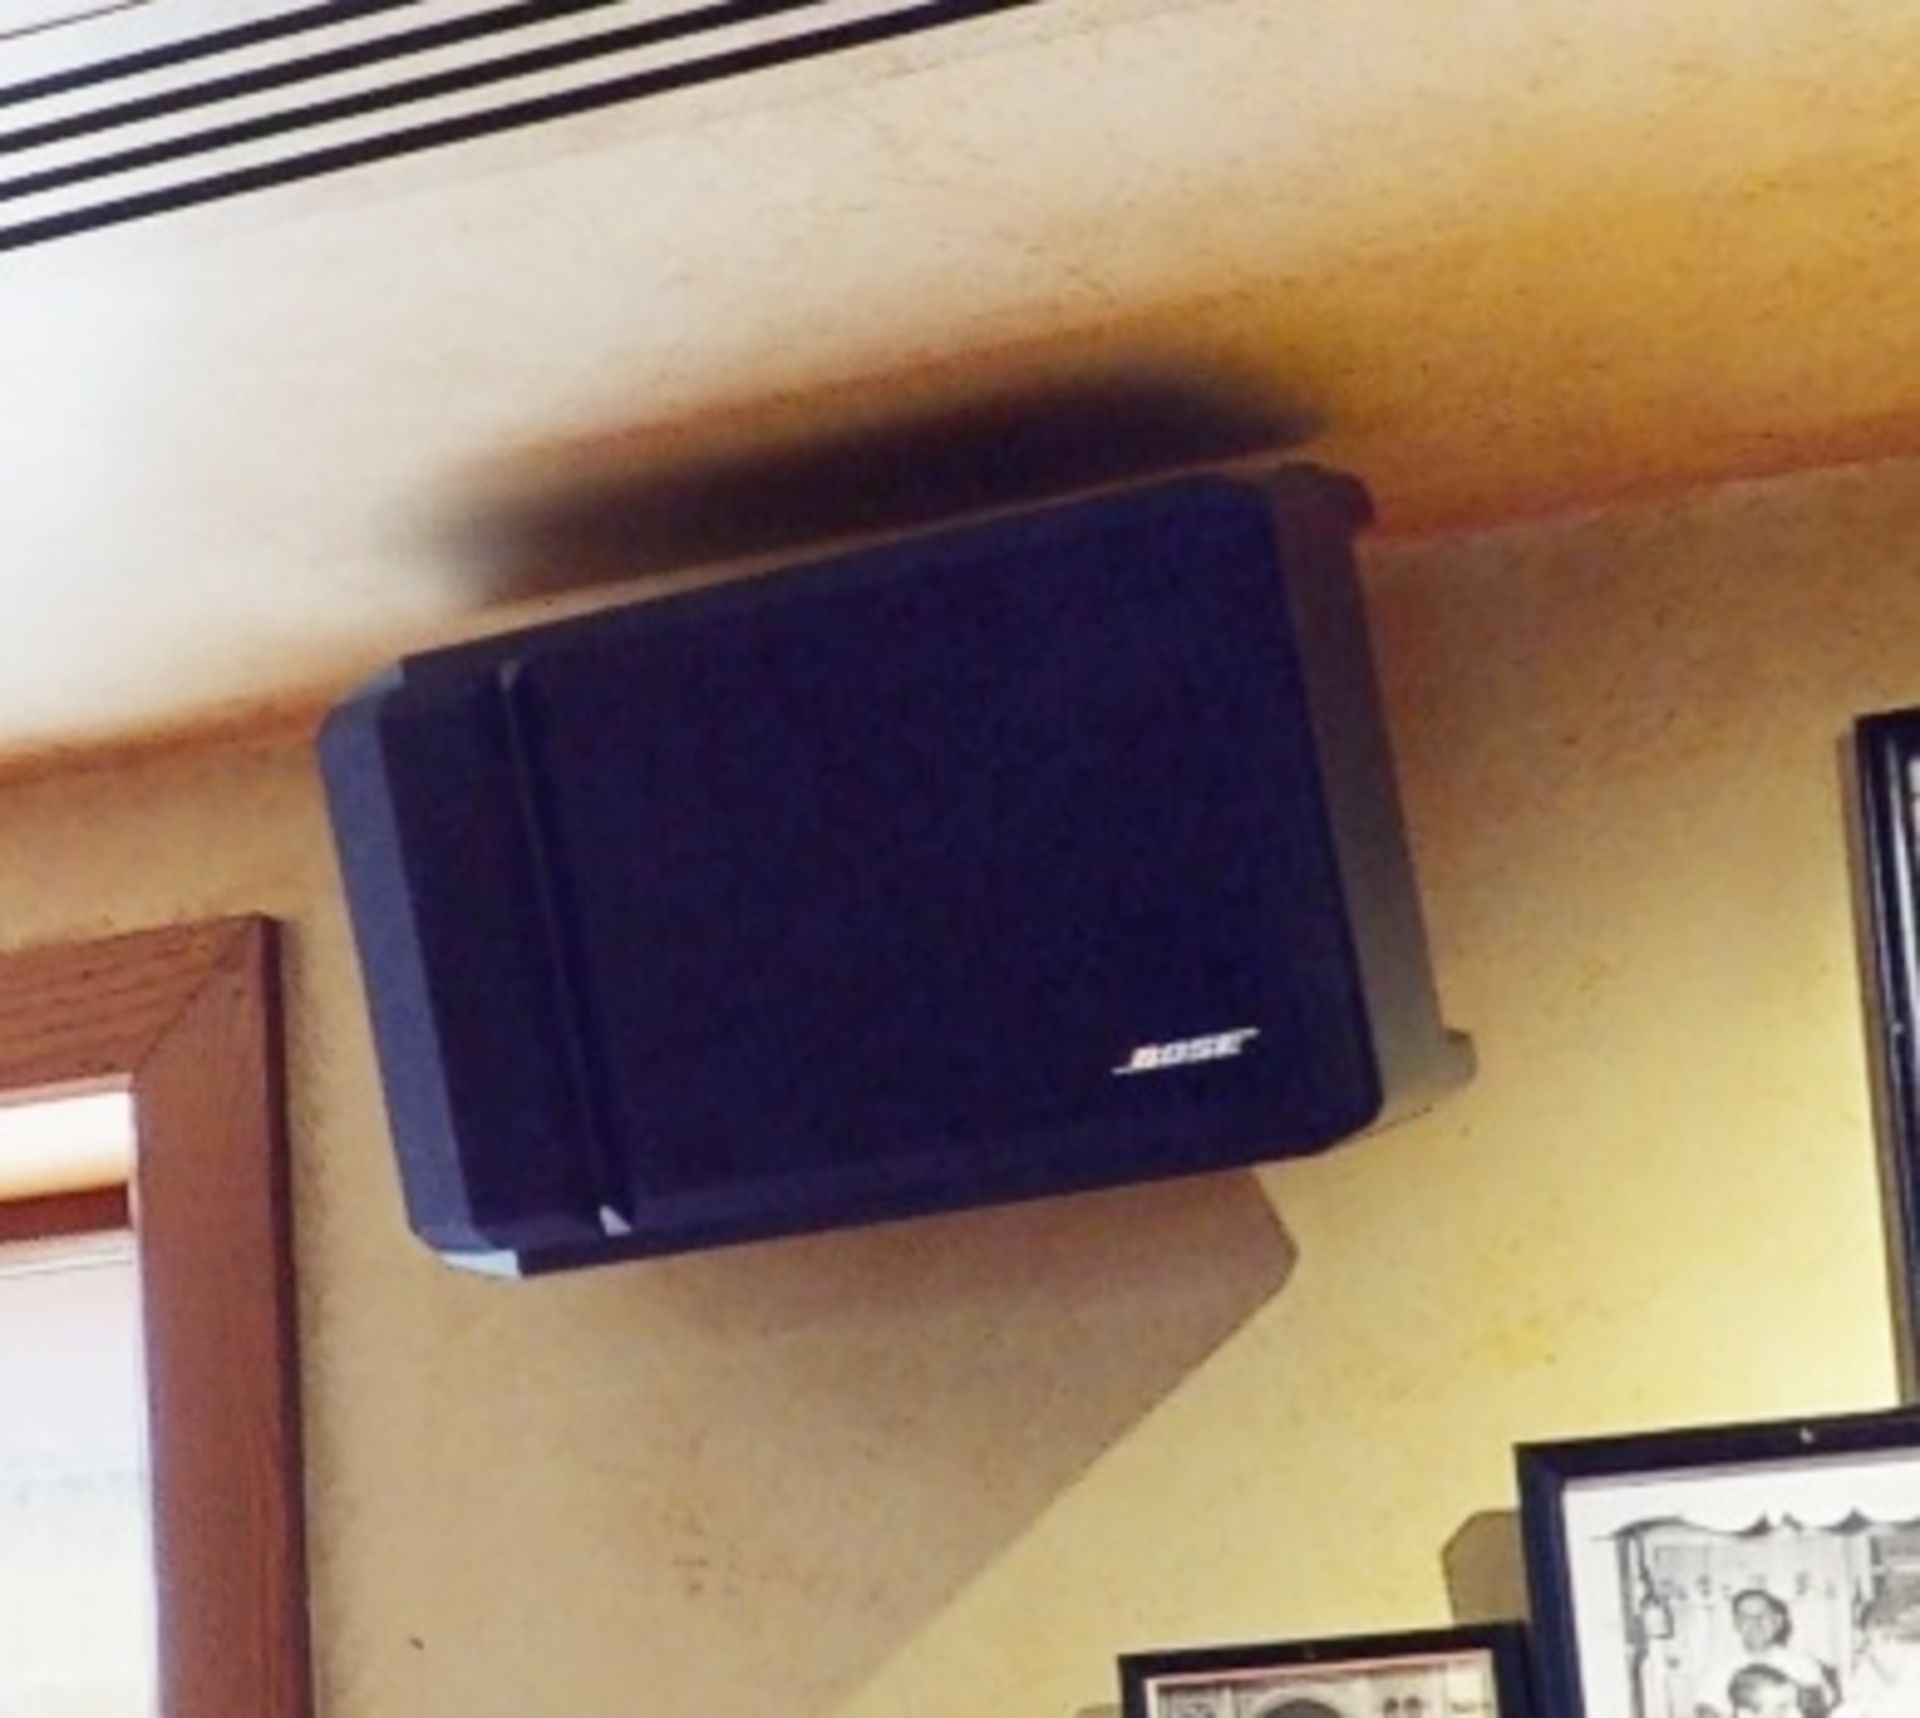 1 x Restaurant Audio System Including 1 x QSC RMX850 Amplifier, 12 x Bose Speaker System & More! - Image 12 of 17